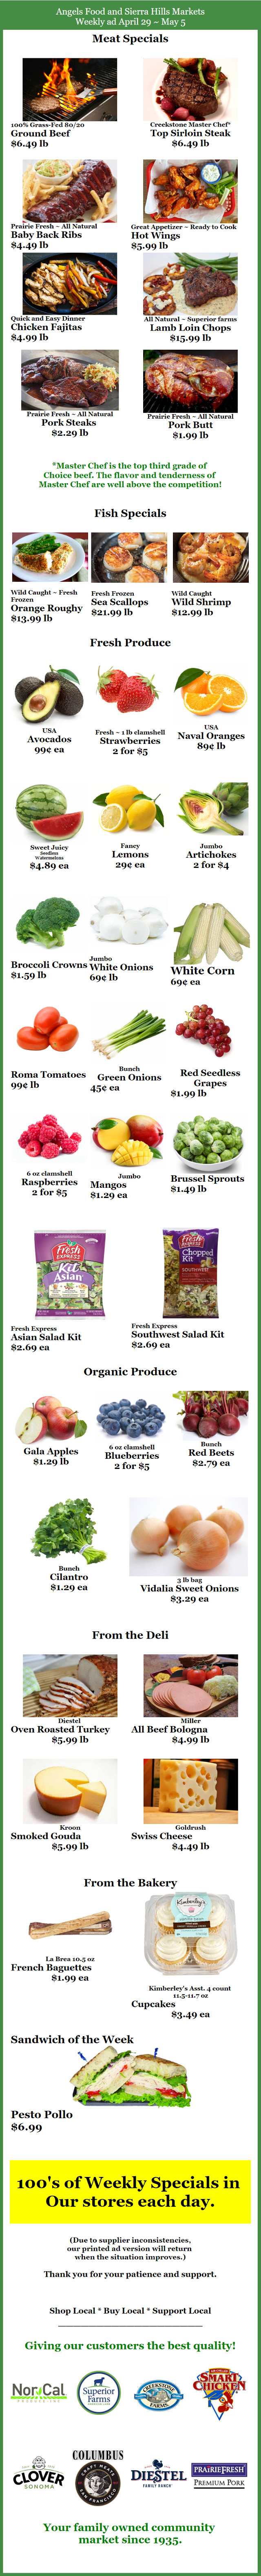 Angels Food and Sierra Hills Markets Weekly Ad & Specials Through May 5th